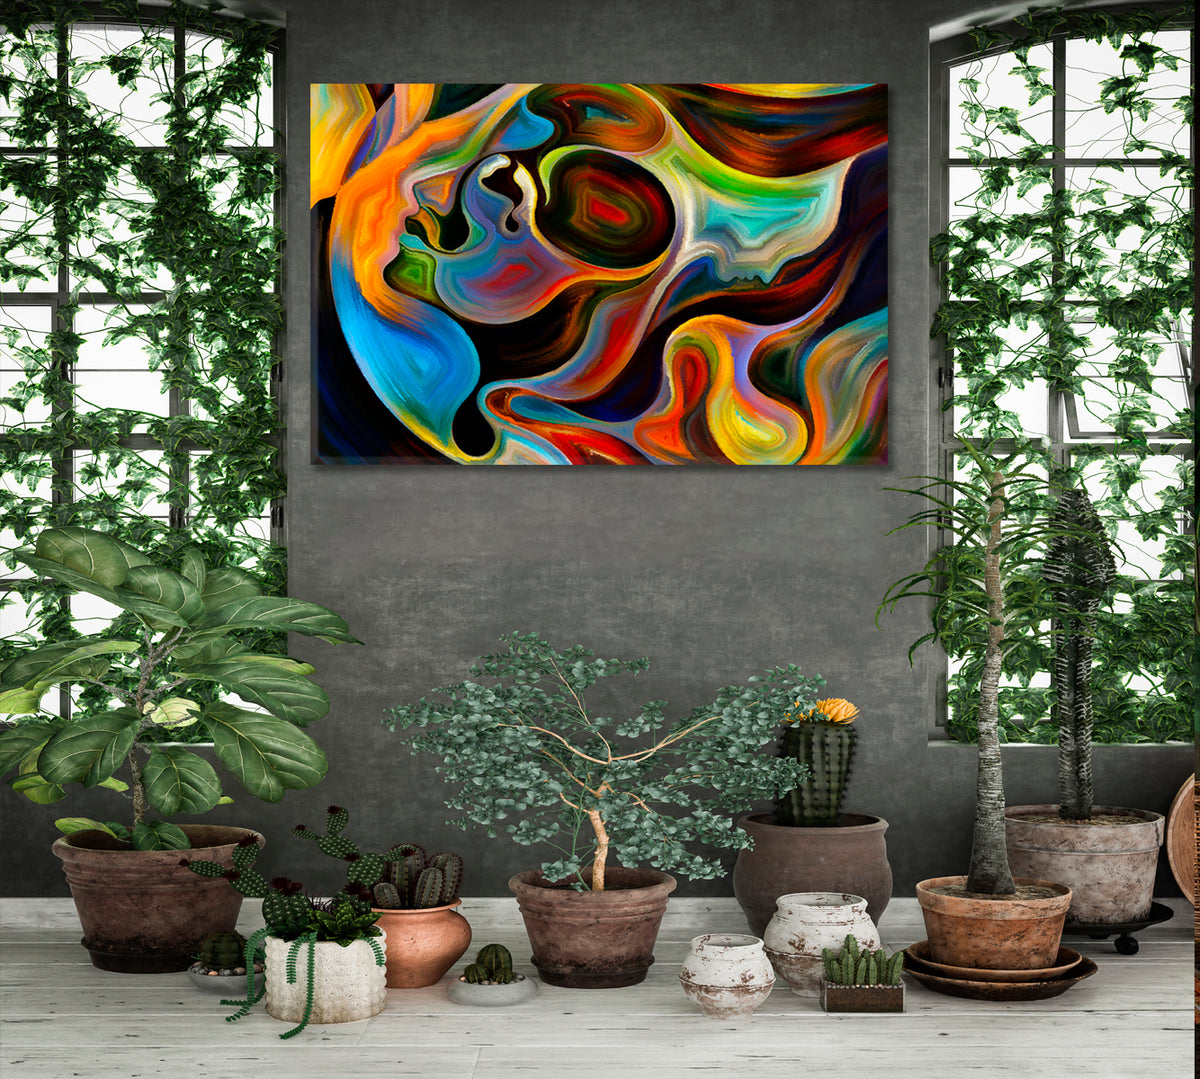 Soul in Colors, Human and Colorful Abstract Forms Contemporary Art Artesty 1 panel 24" x 16" 